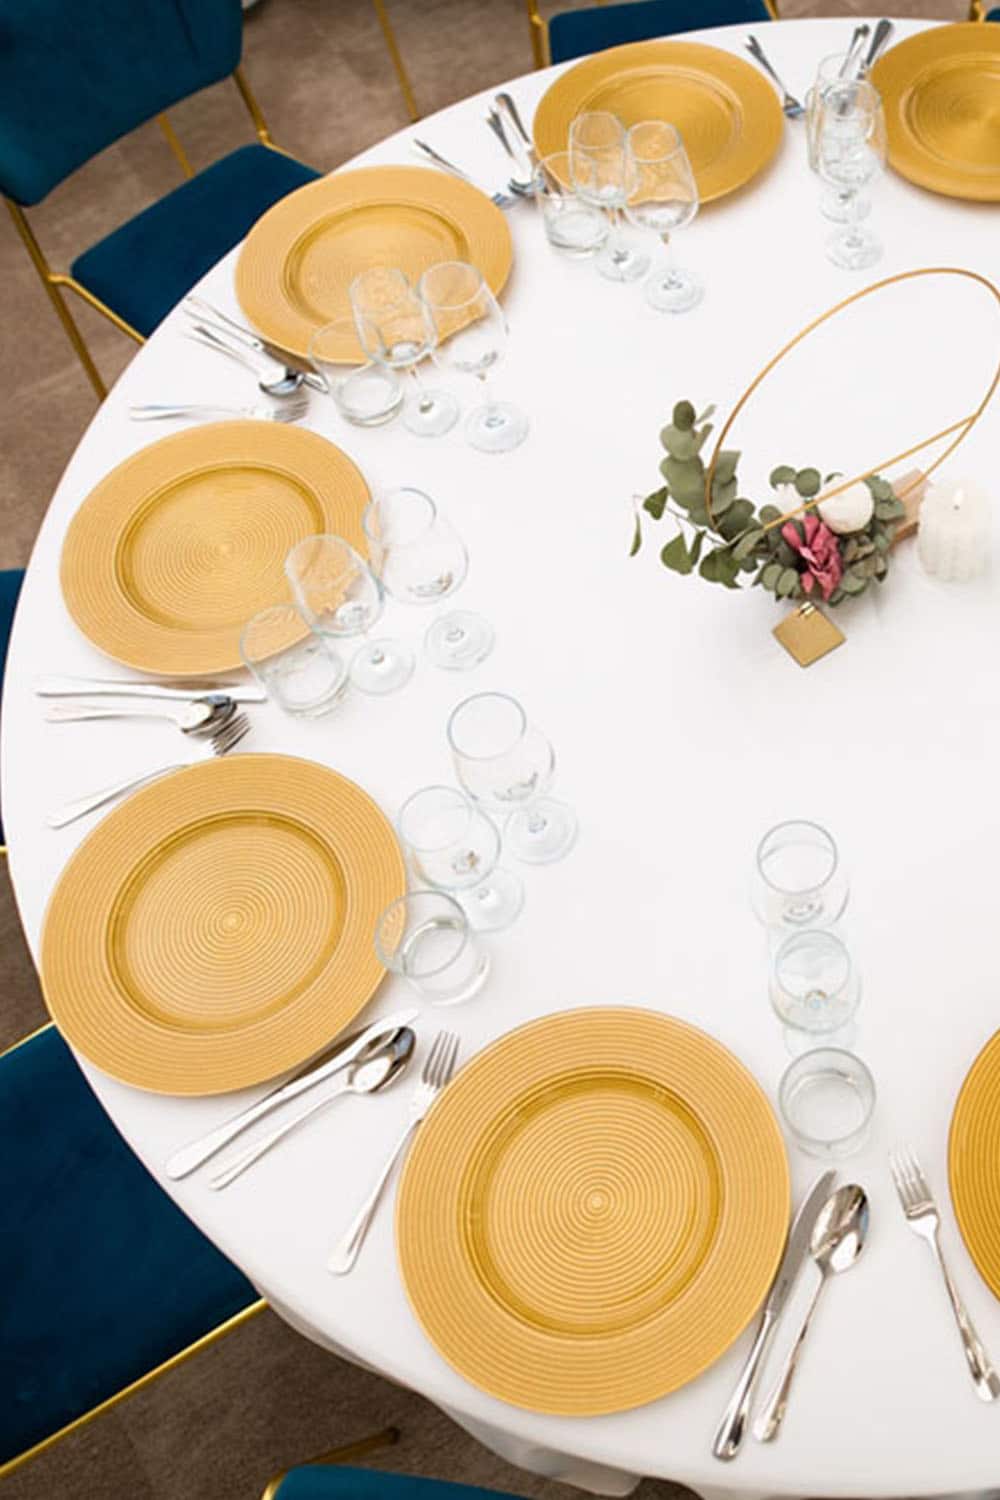 A round table with gold plates and silverware suitable for Sibiu visitors looking for accommodation.